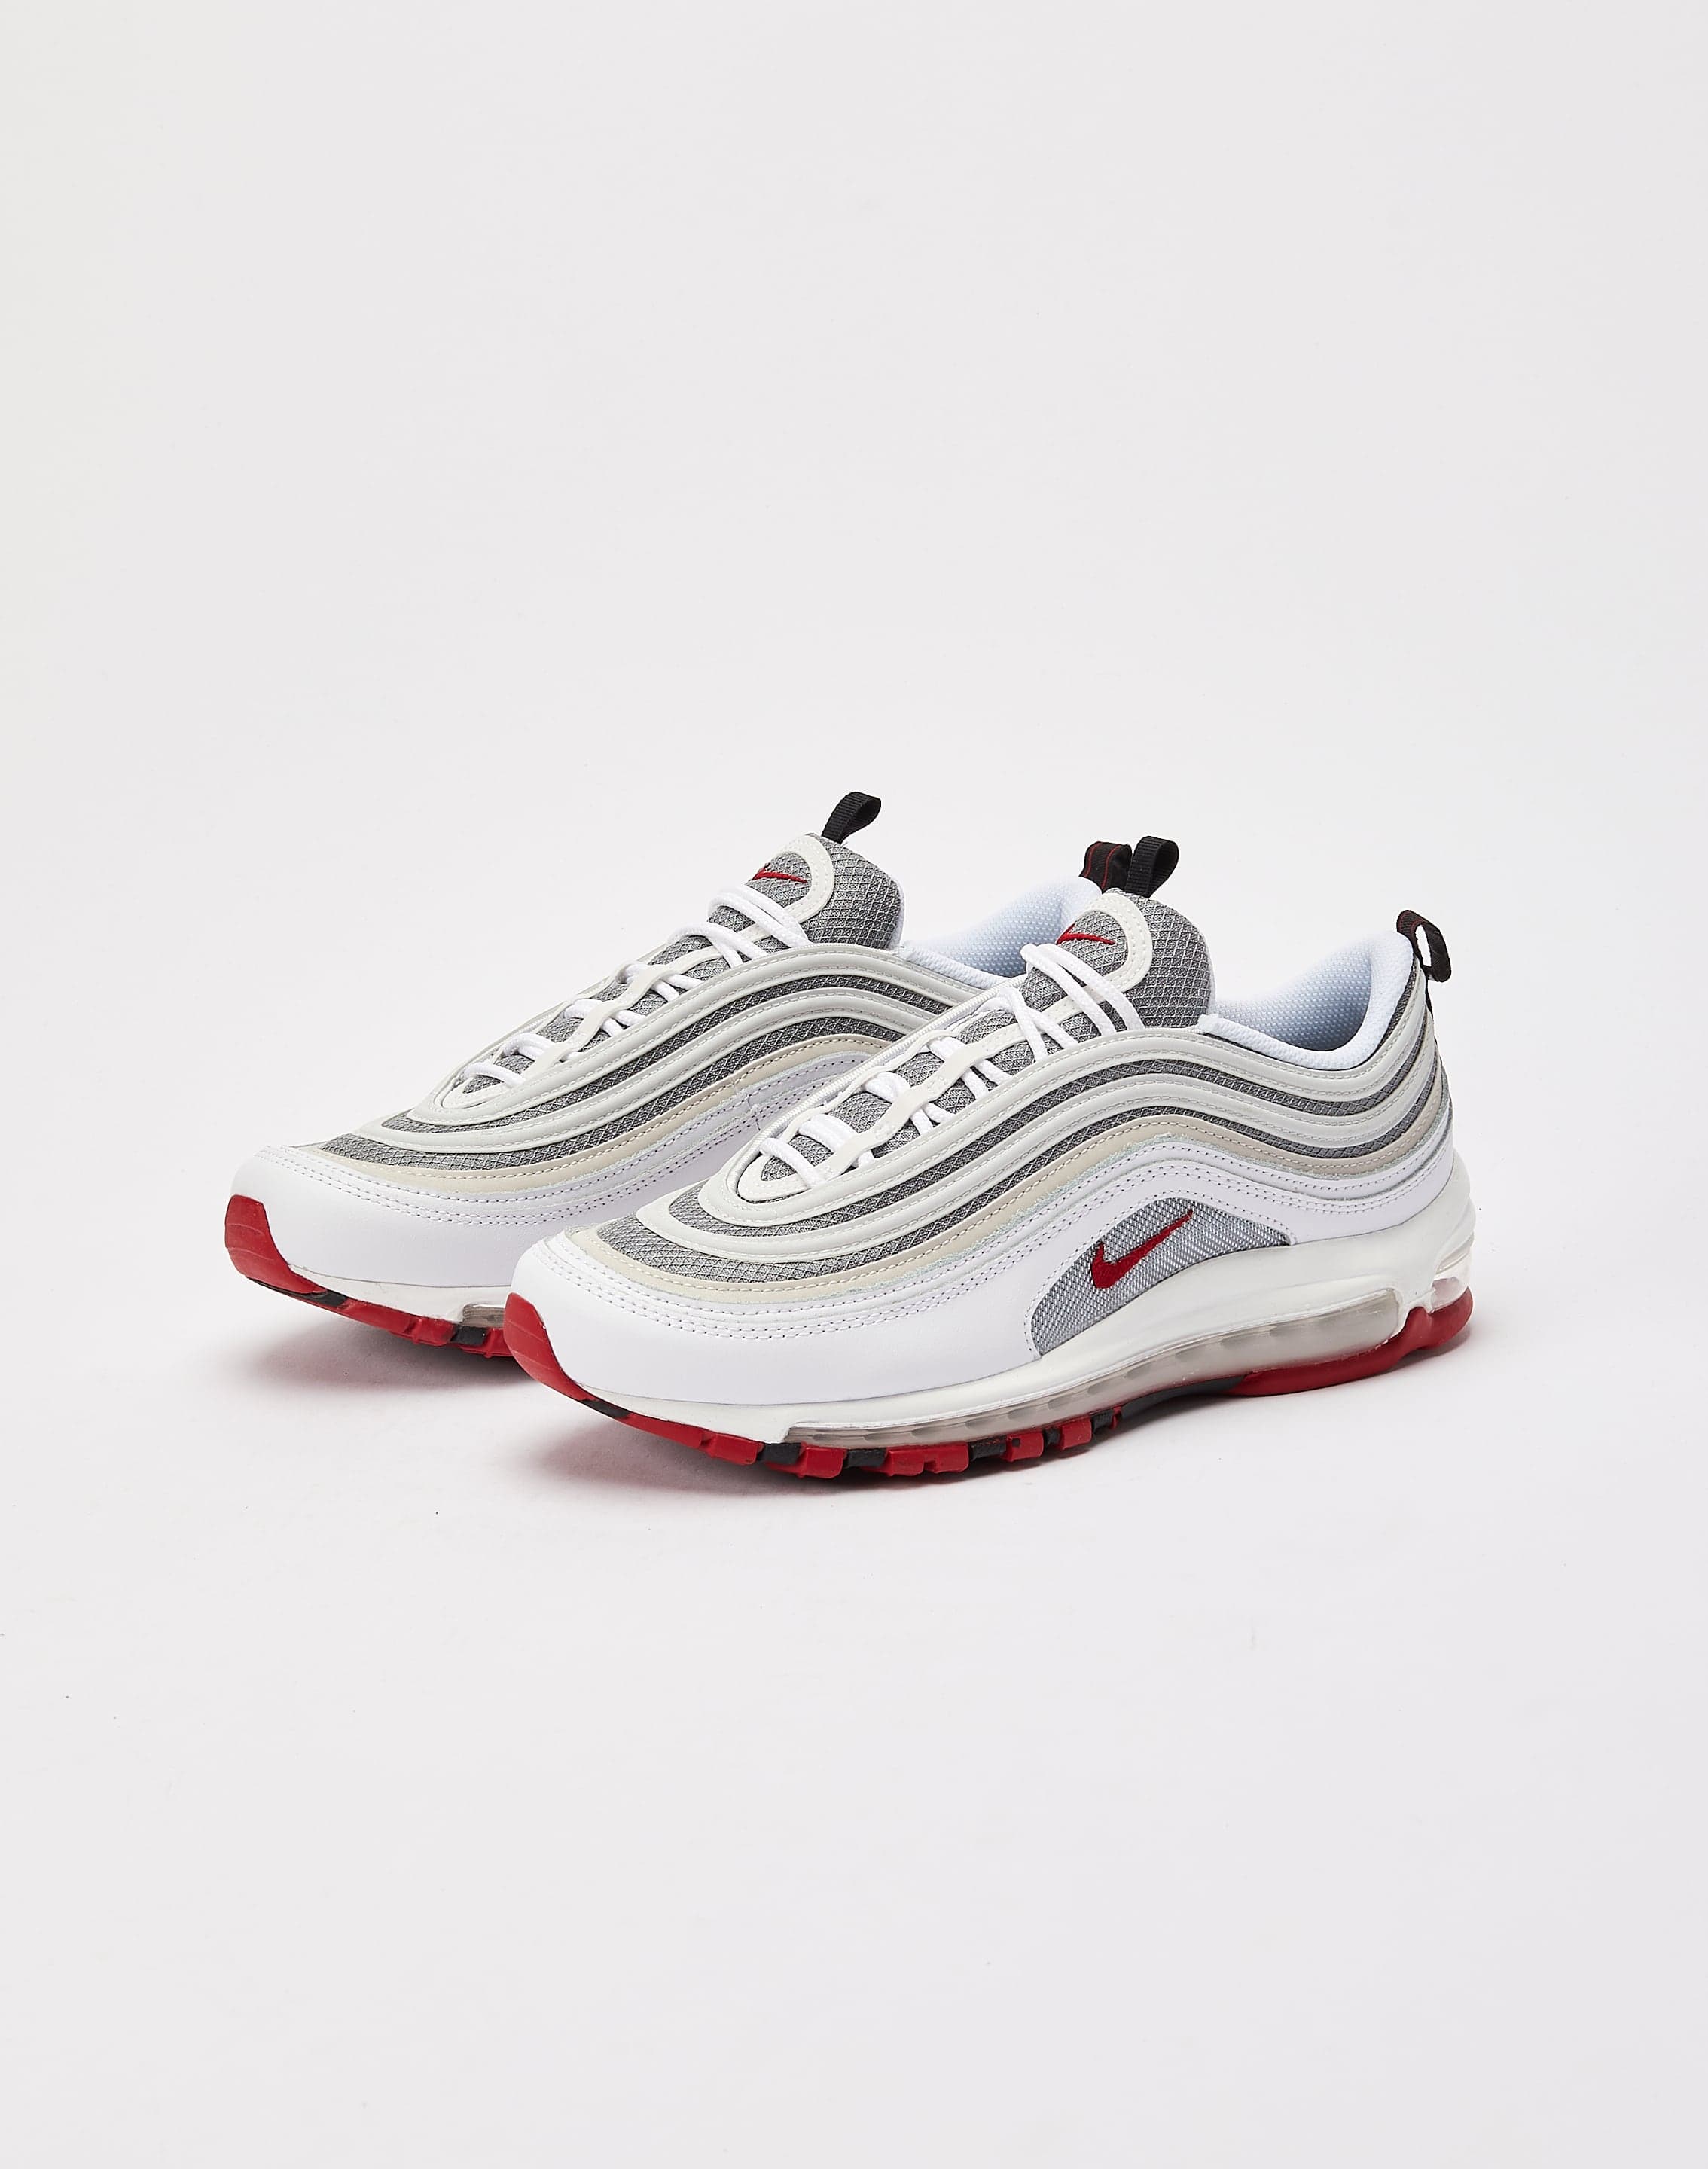 Nike Air Max 97 White Varsity Red Silver Sneakers DM0027-100 Mens Size